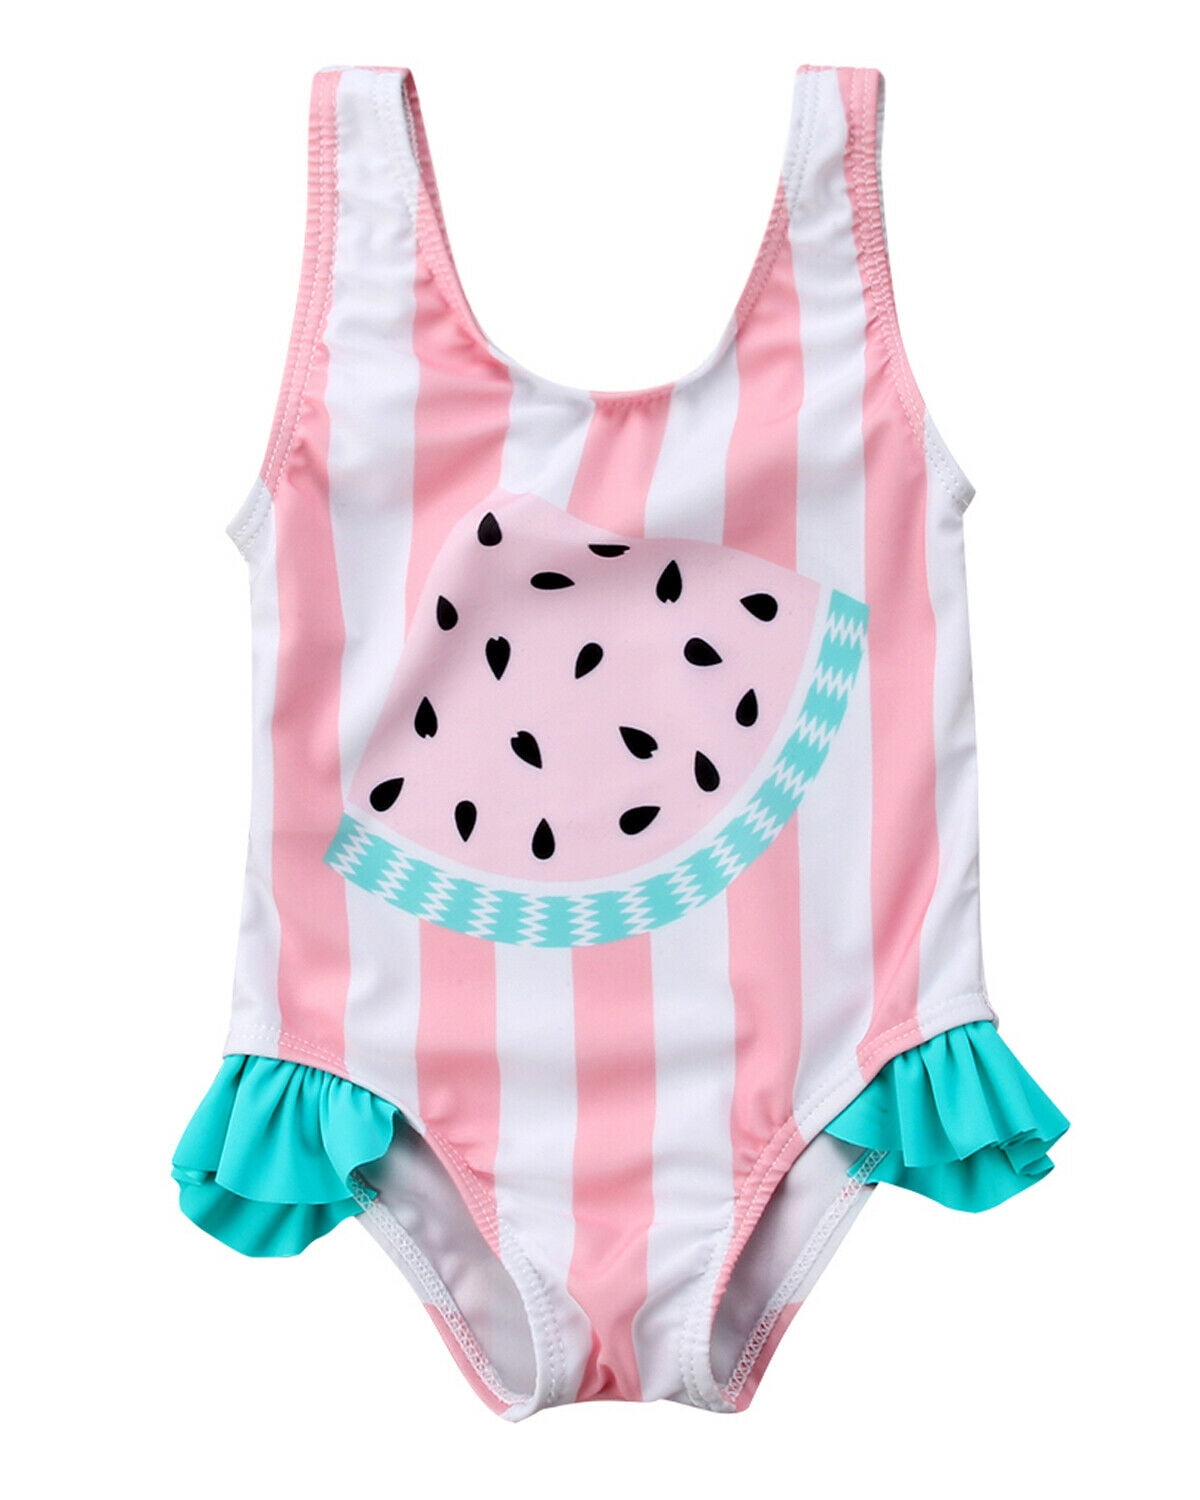 7-Mi Baby Swimsuit One Pieces Toddler Kids Swimming Costume Boy and Girl Wet Suit Baby Sunsuits UPF 50 Sun Protection